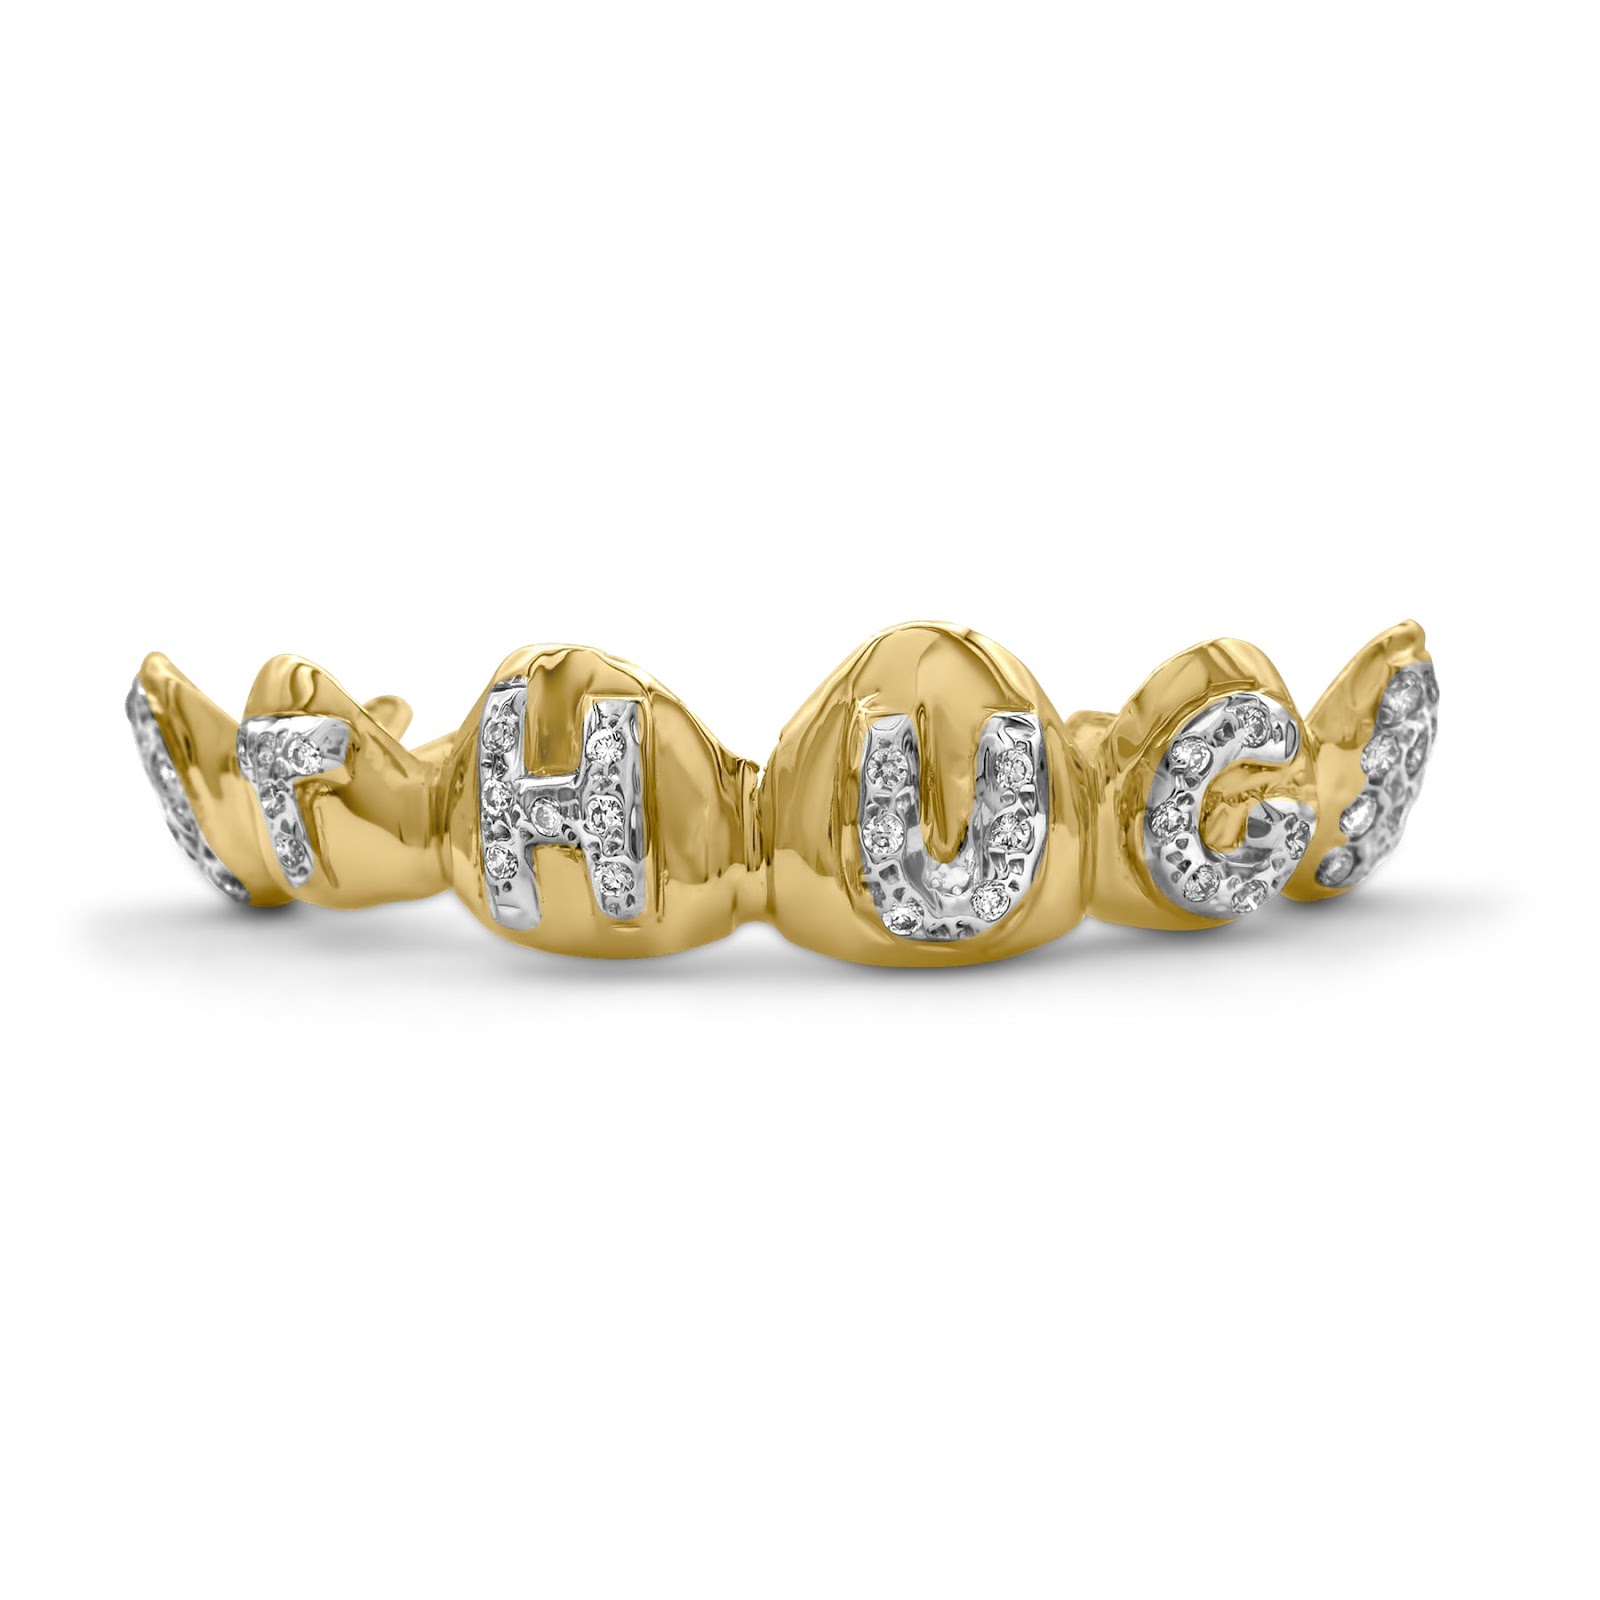 Baguette Diamond Grillz: Sparkle with Every Smile!